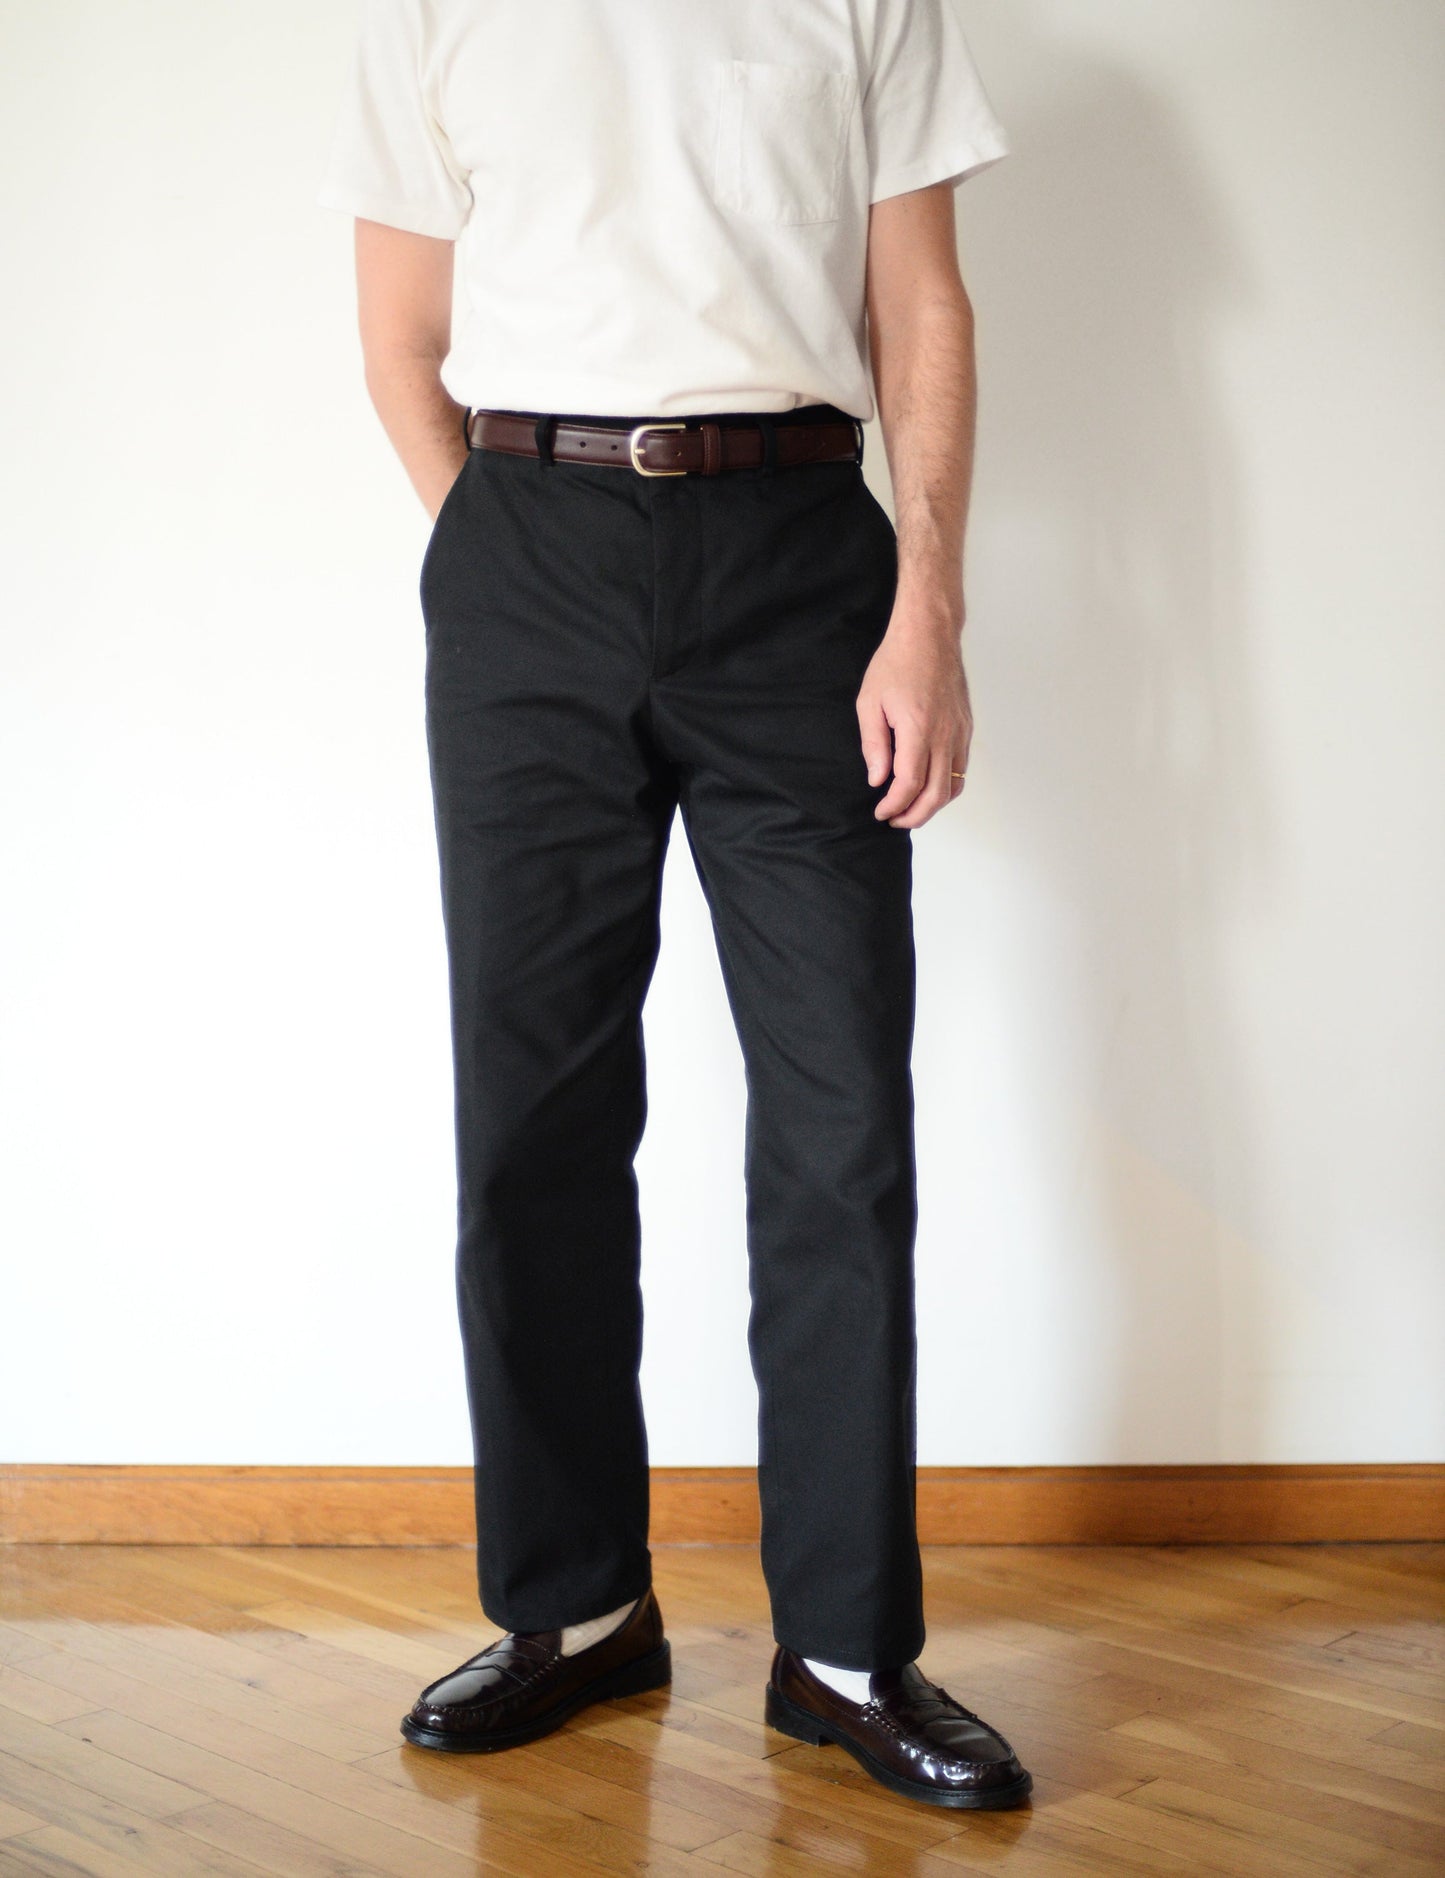 Brooklyn Tailors BKT36 Straight Leg Pant in Cotton Cavalry Twill - Black on-body shot. Model is wearing pants with a white t-shirt, black loafers, and white socks.